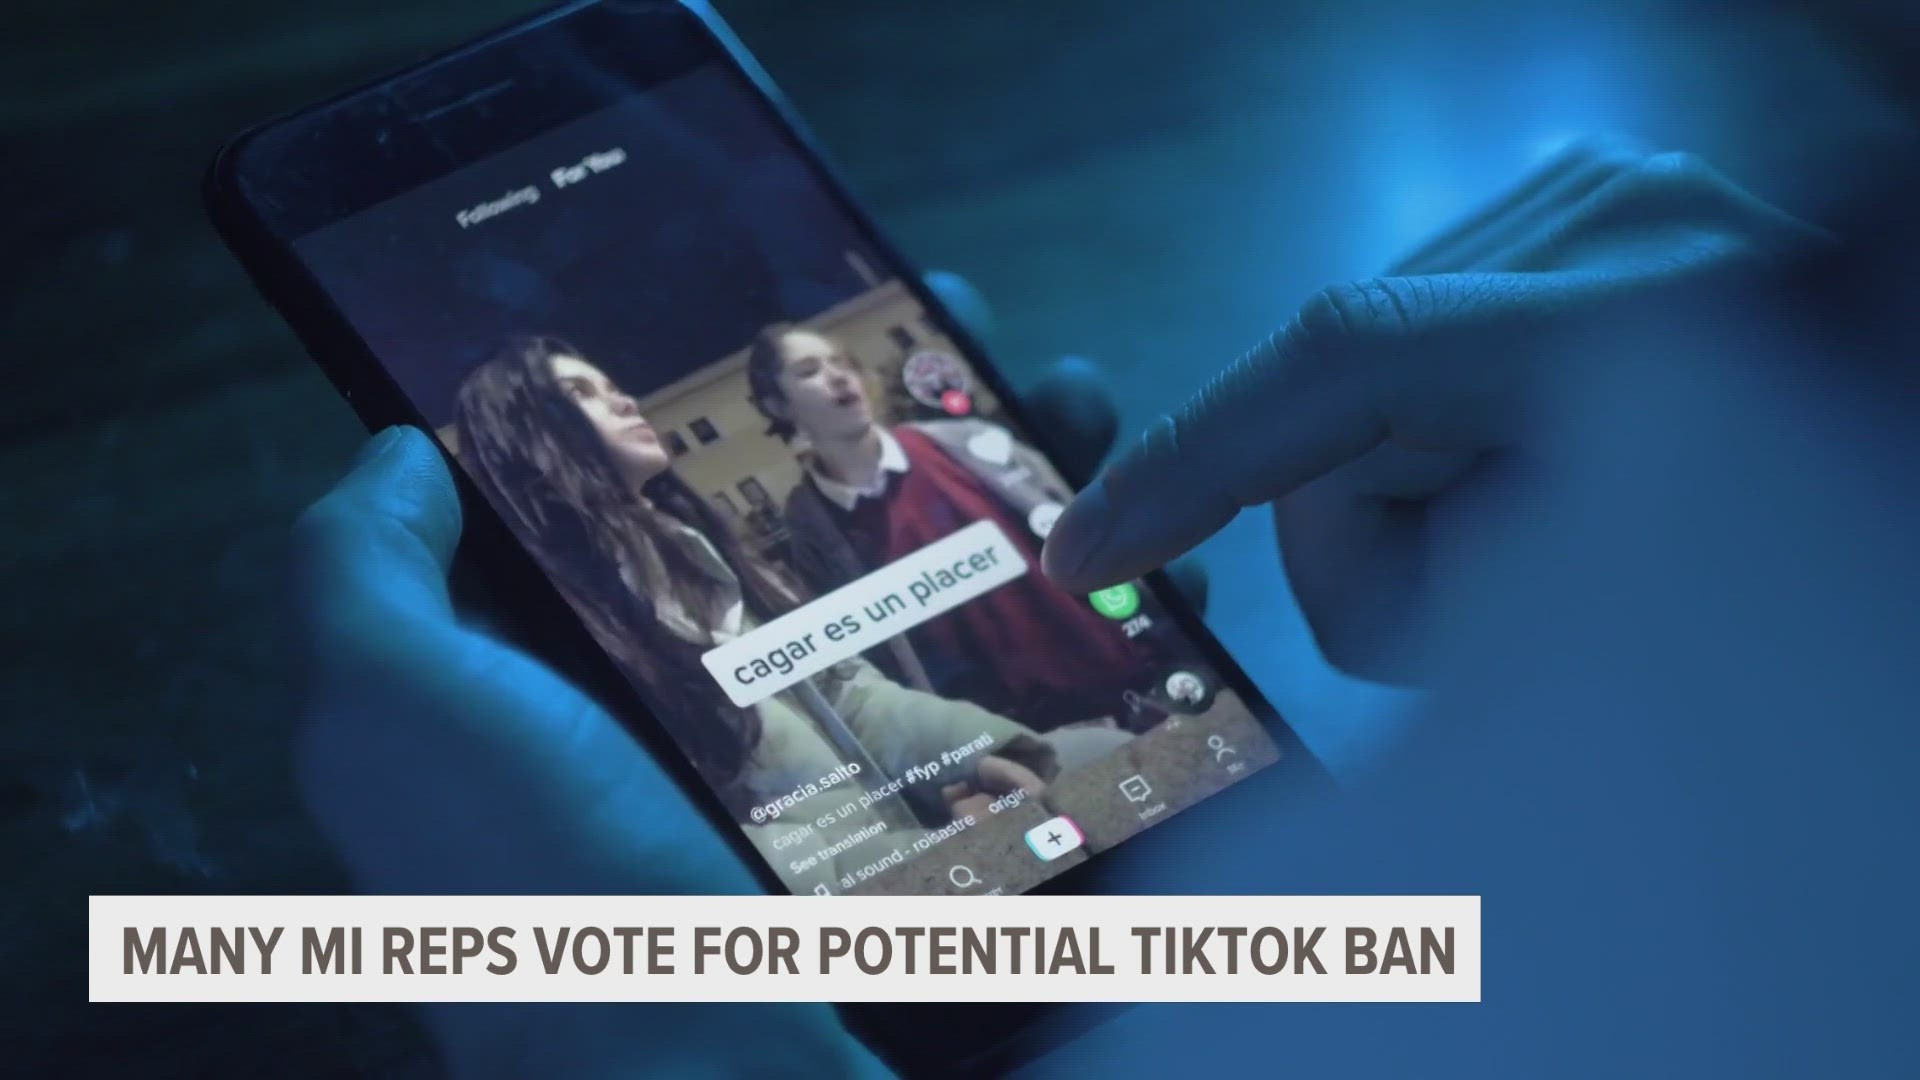 The bill would give TikTok 180 days to separate from its China-based parent company or be banned from U.S. app stores and internet hosting services.